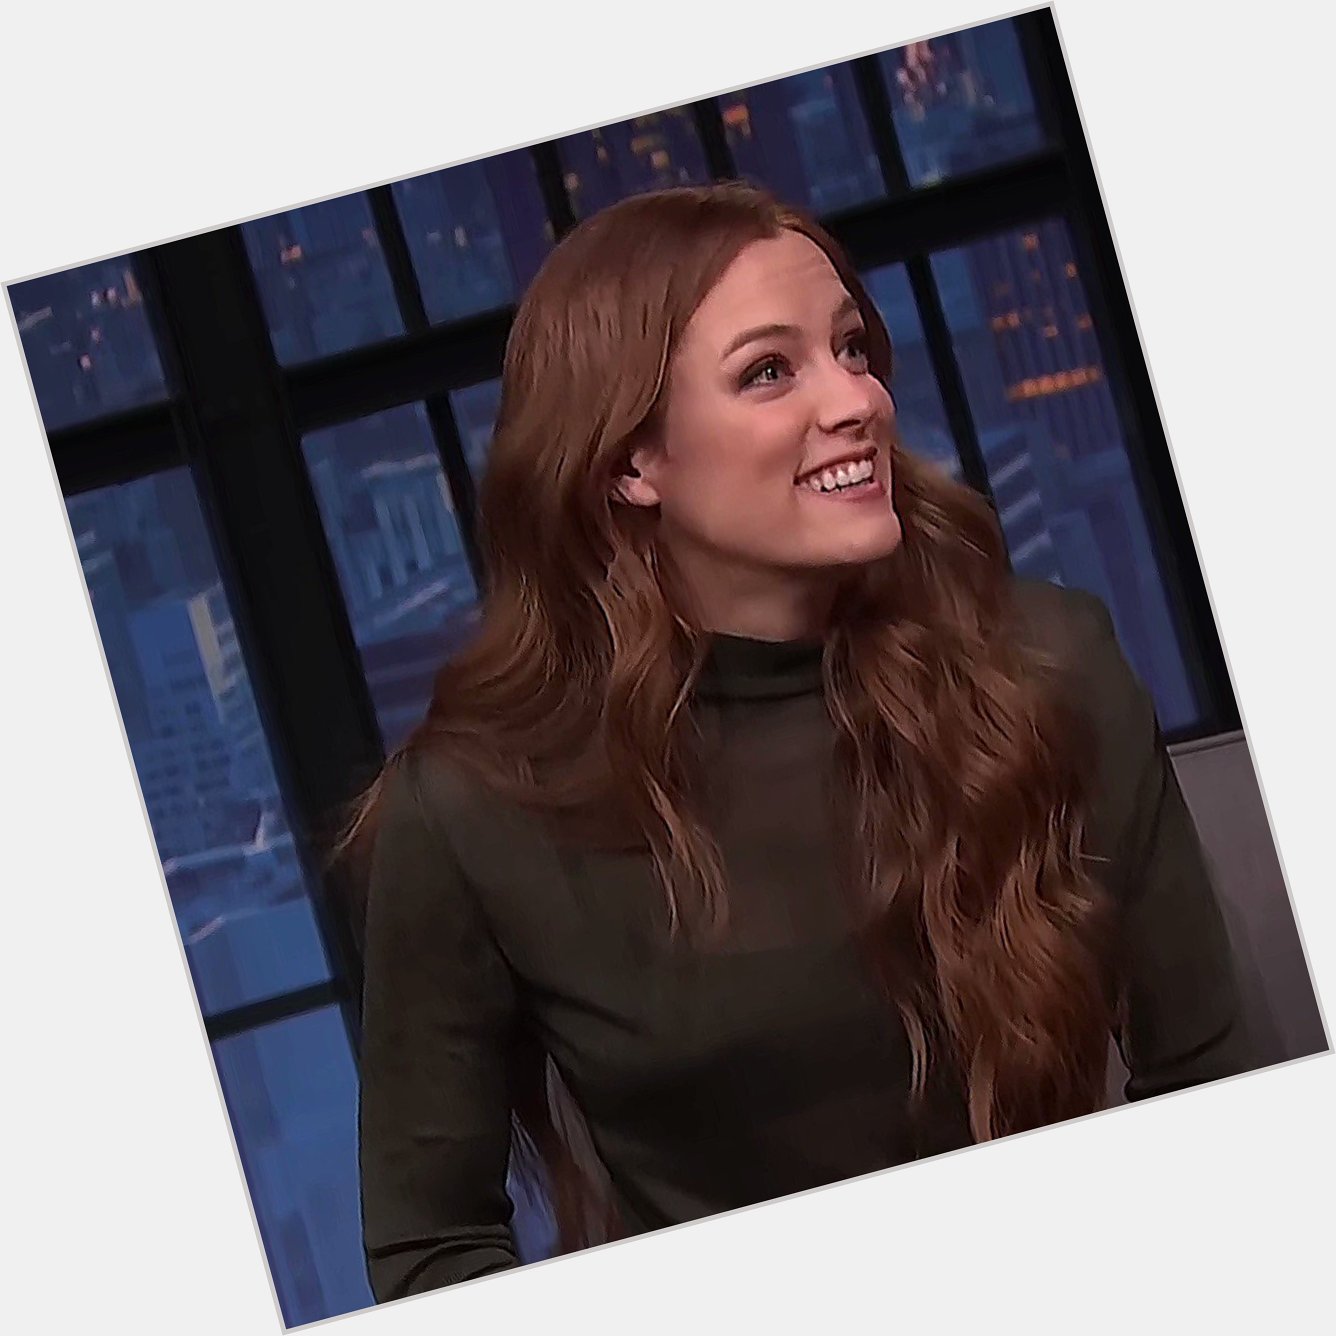 HAPPY BIRTHDAY TO RILEY KEOUGH AKA THE POOKIEST OF POOKIES AKA THE LOML AKA OUR DAISY JAY  
